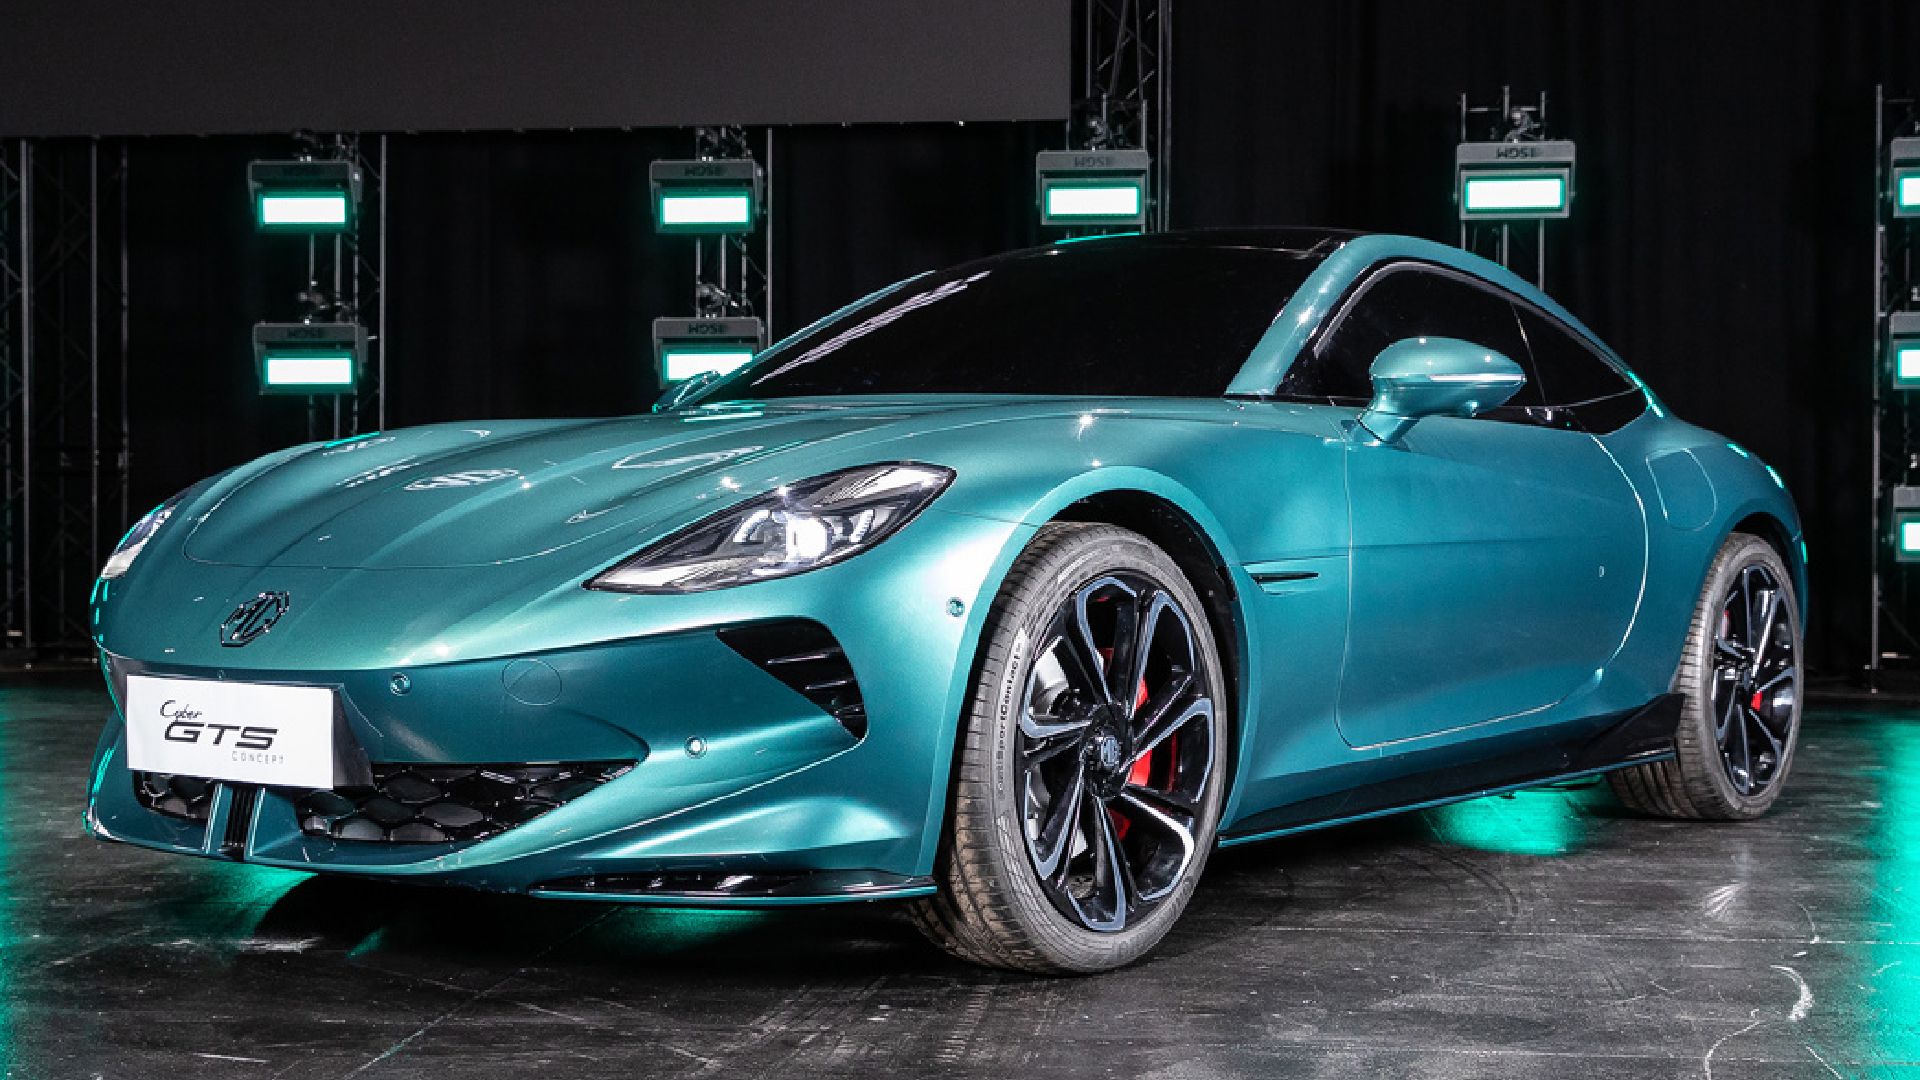 MG showcased Cyber GTS Concept at Goodwood Festival of Speed (Source: Goodwood)